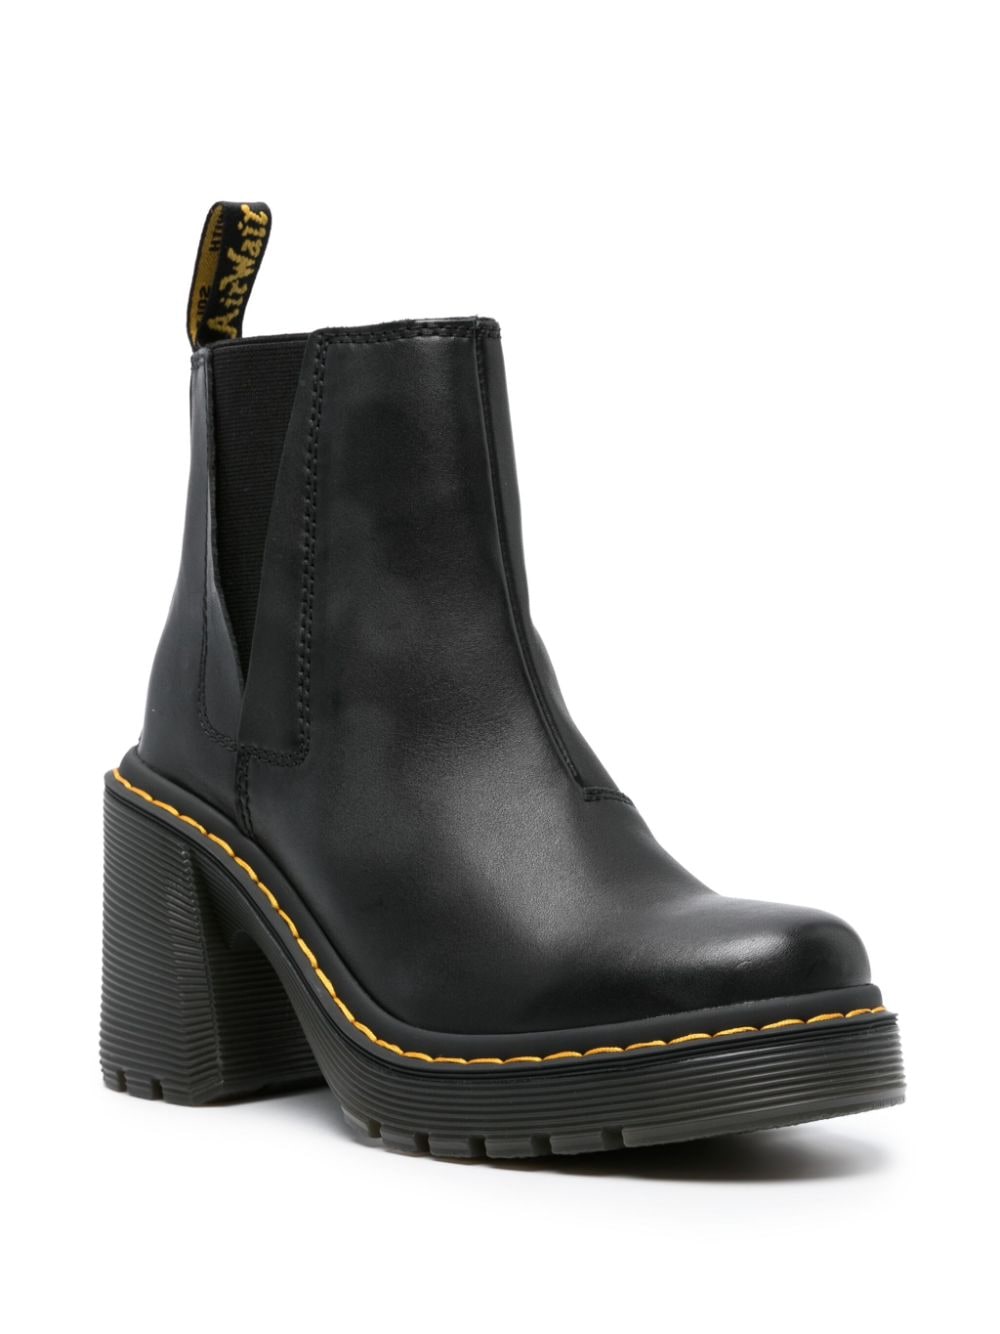 Image 2 of Dr. Martens Spence 87mm leather boots